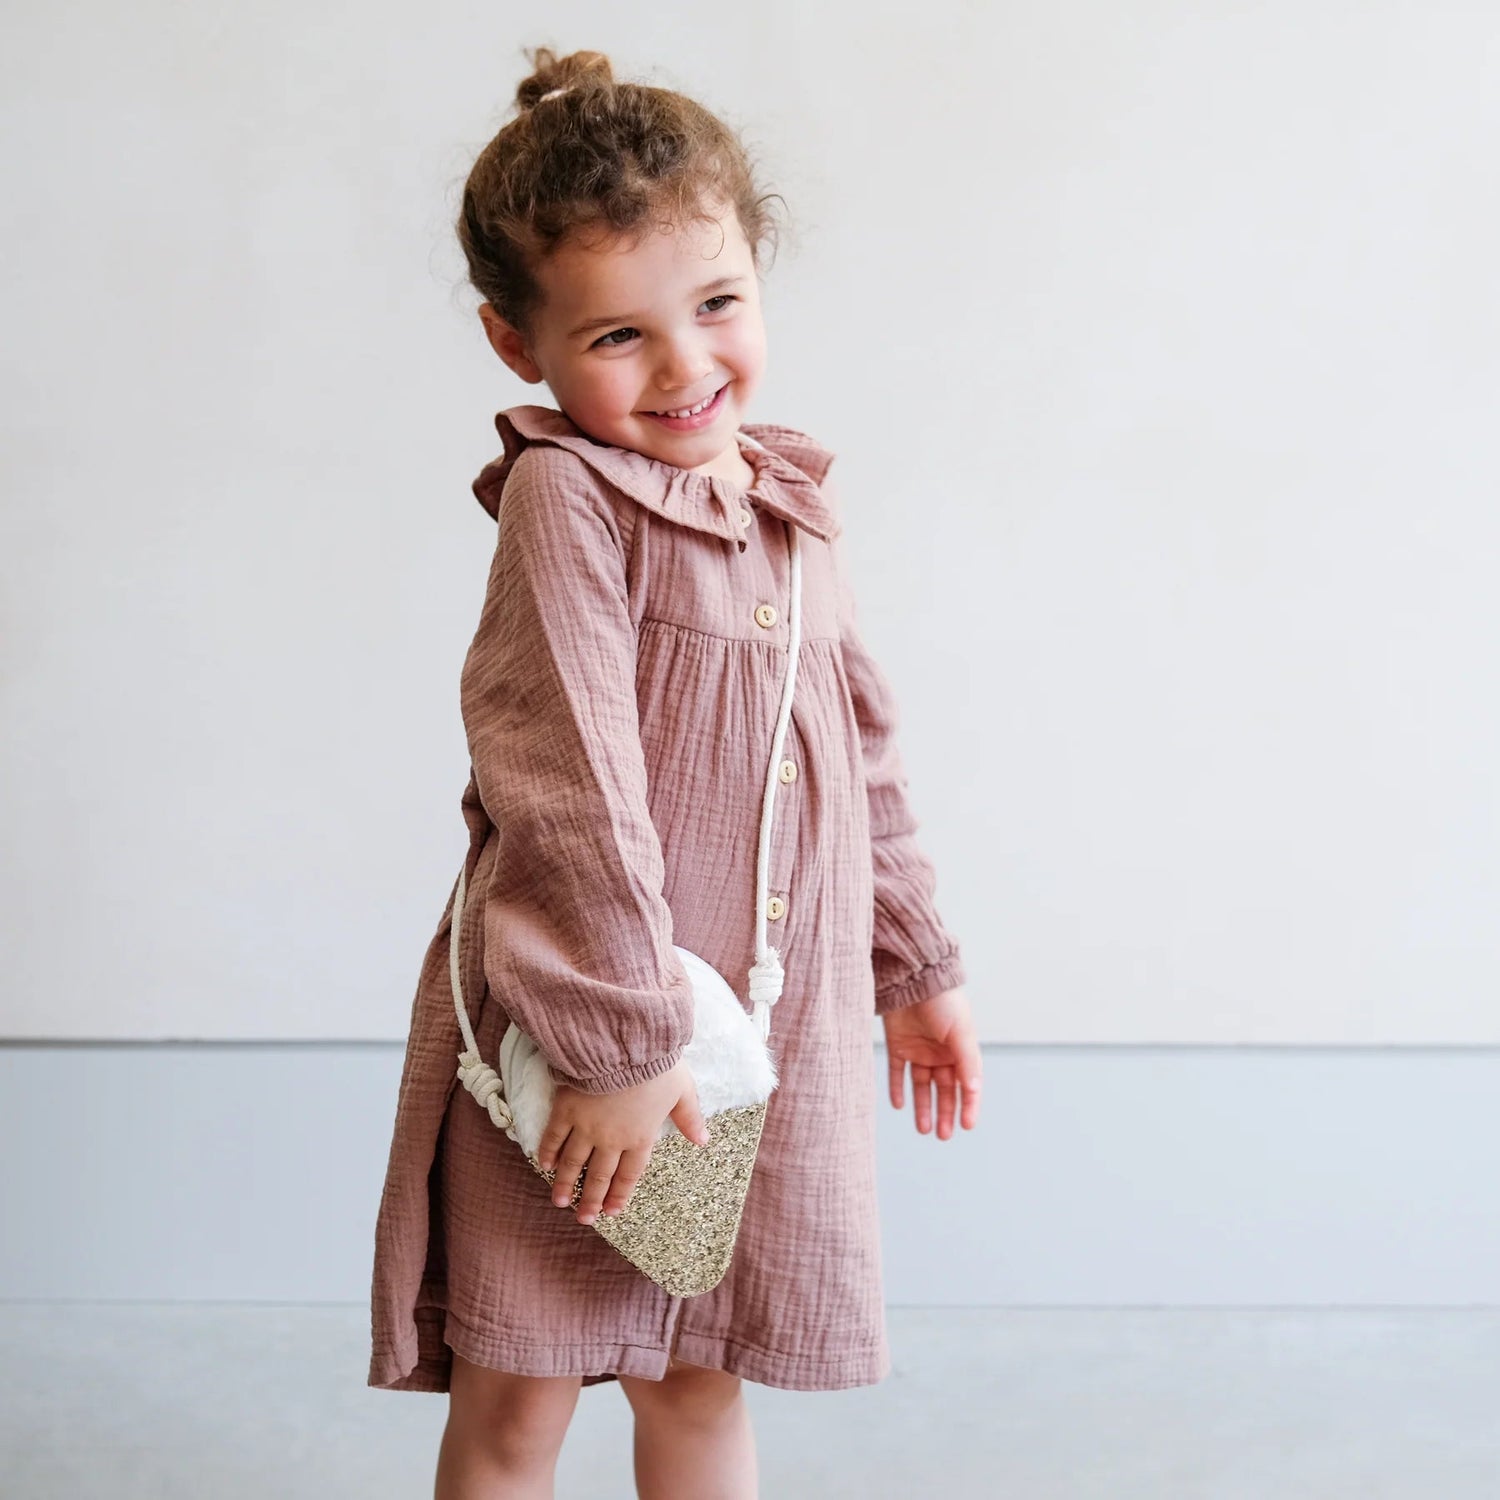 MIMI & LULA | ICE-CREAM BAG - BY THE SEASIDE *PRE-ORDER* by MIMI & LULA - The Playful Collective